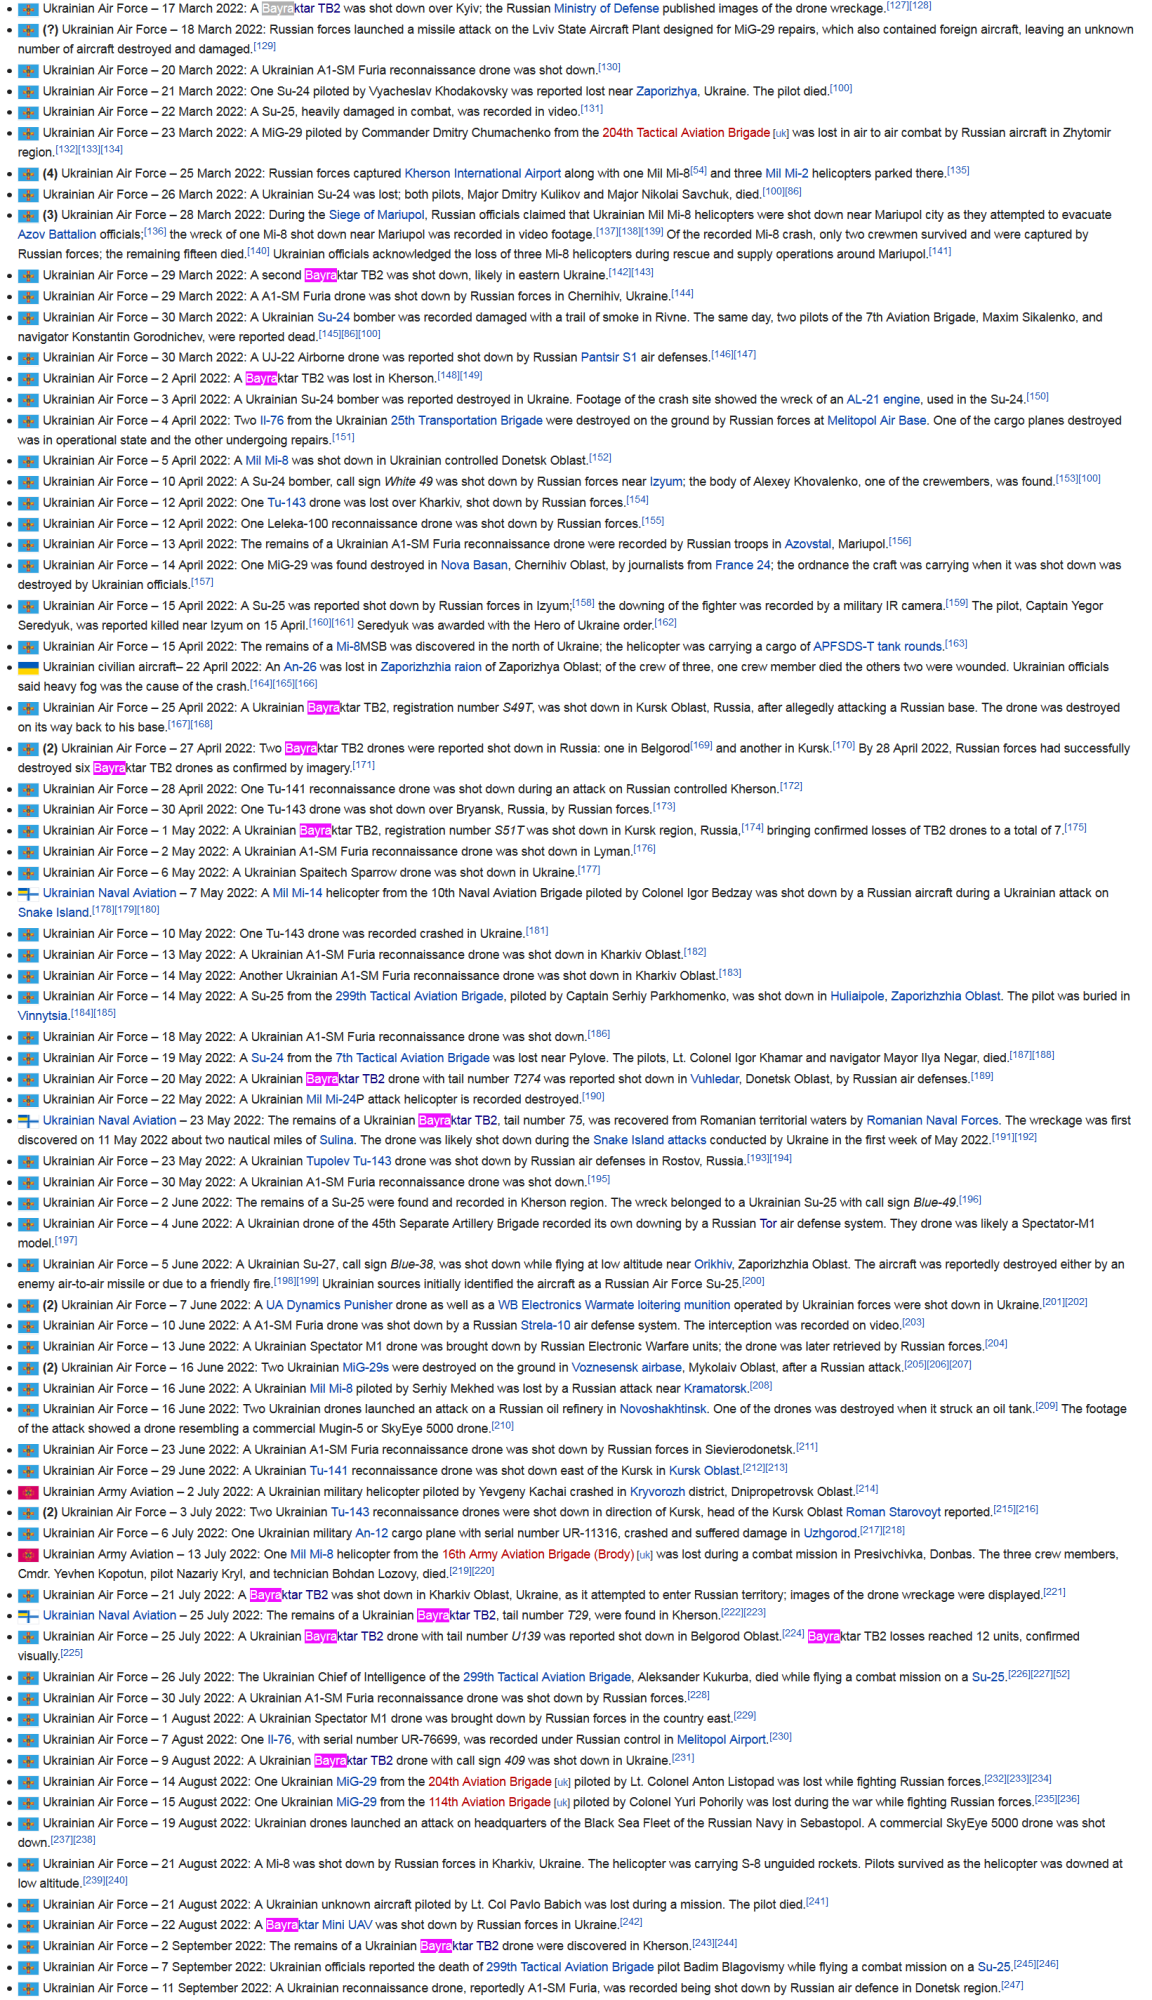 Screenshot_2022-09-15 List of aircraft losses during the Russo-Ukrainian War - Wikipedia.png